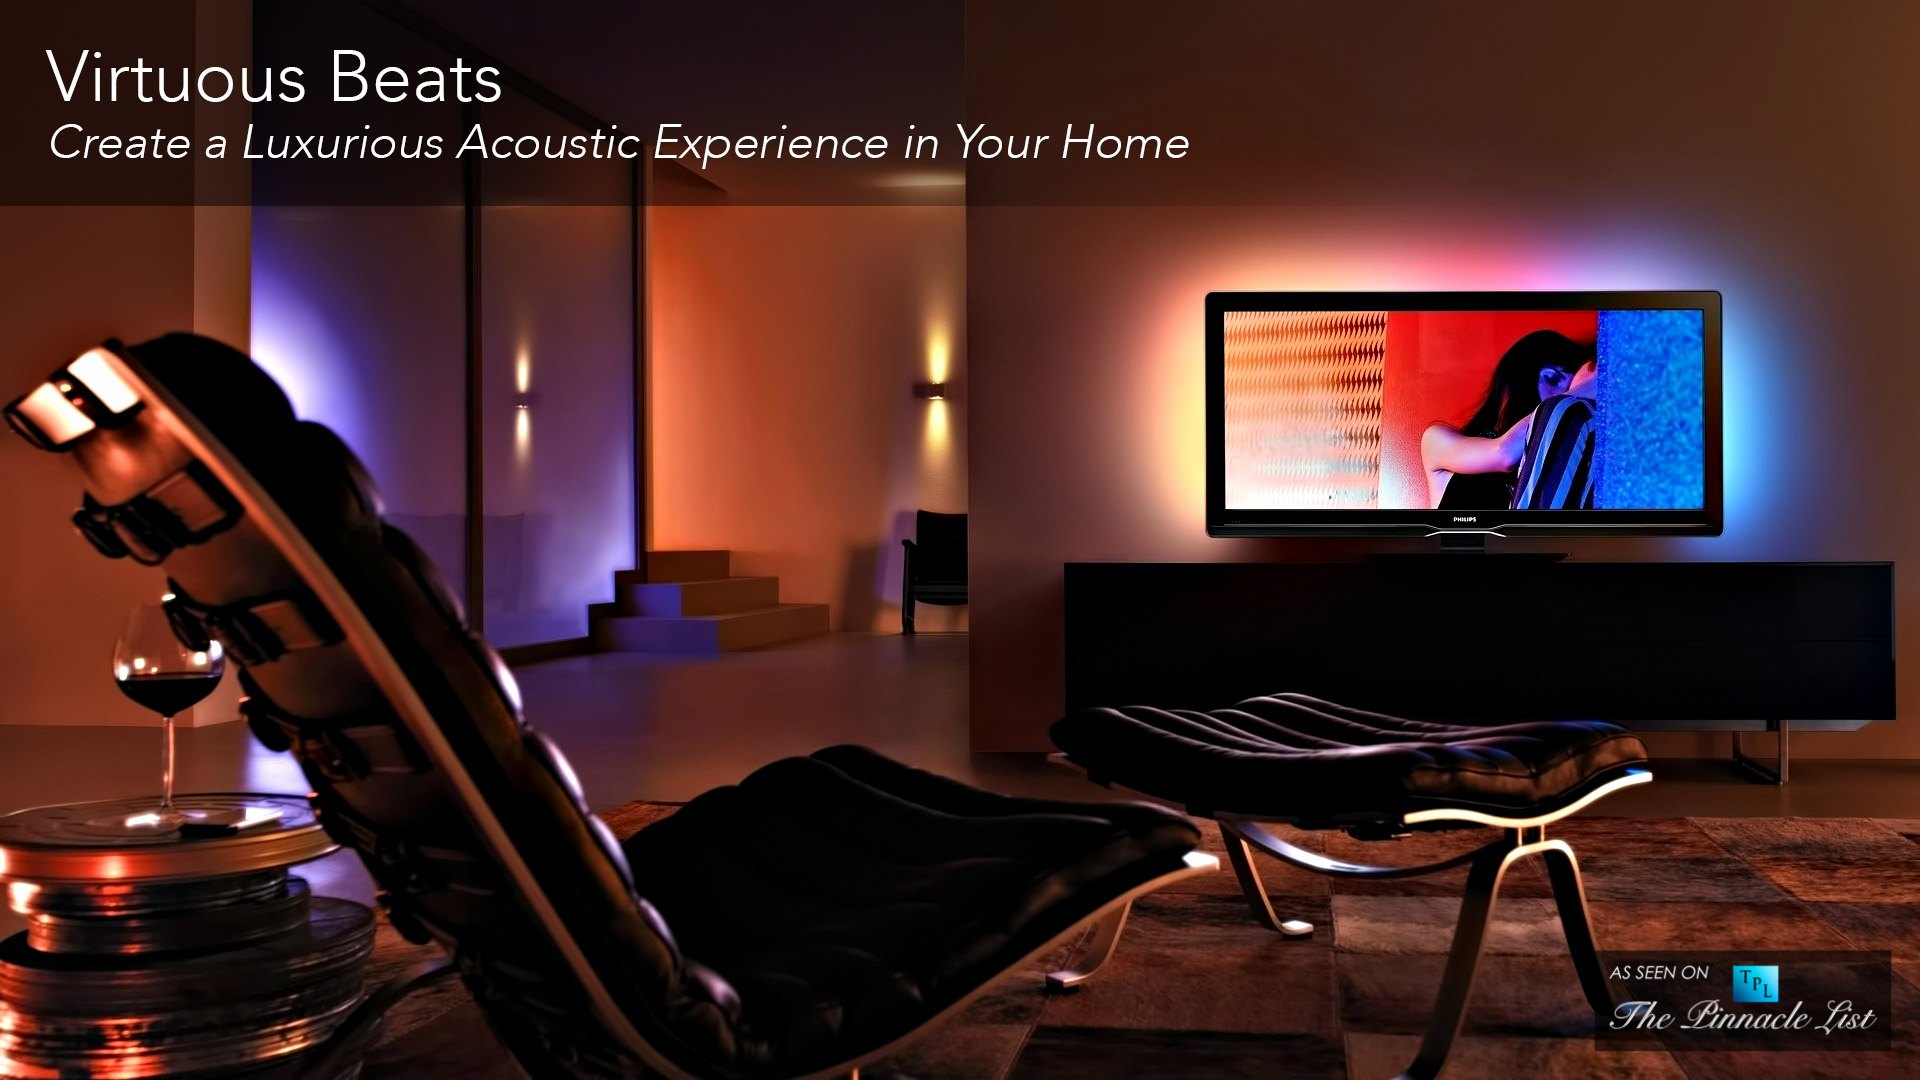 Virtuous Beats - Create a Luxurious Acoustic Experience in Your Home